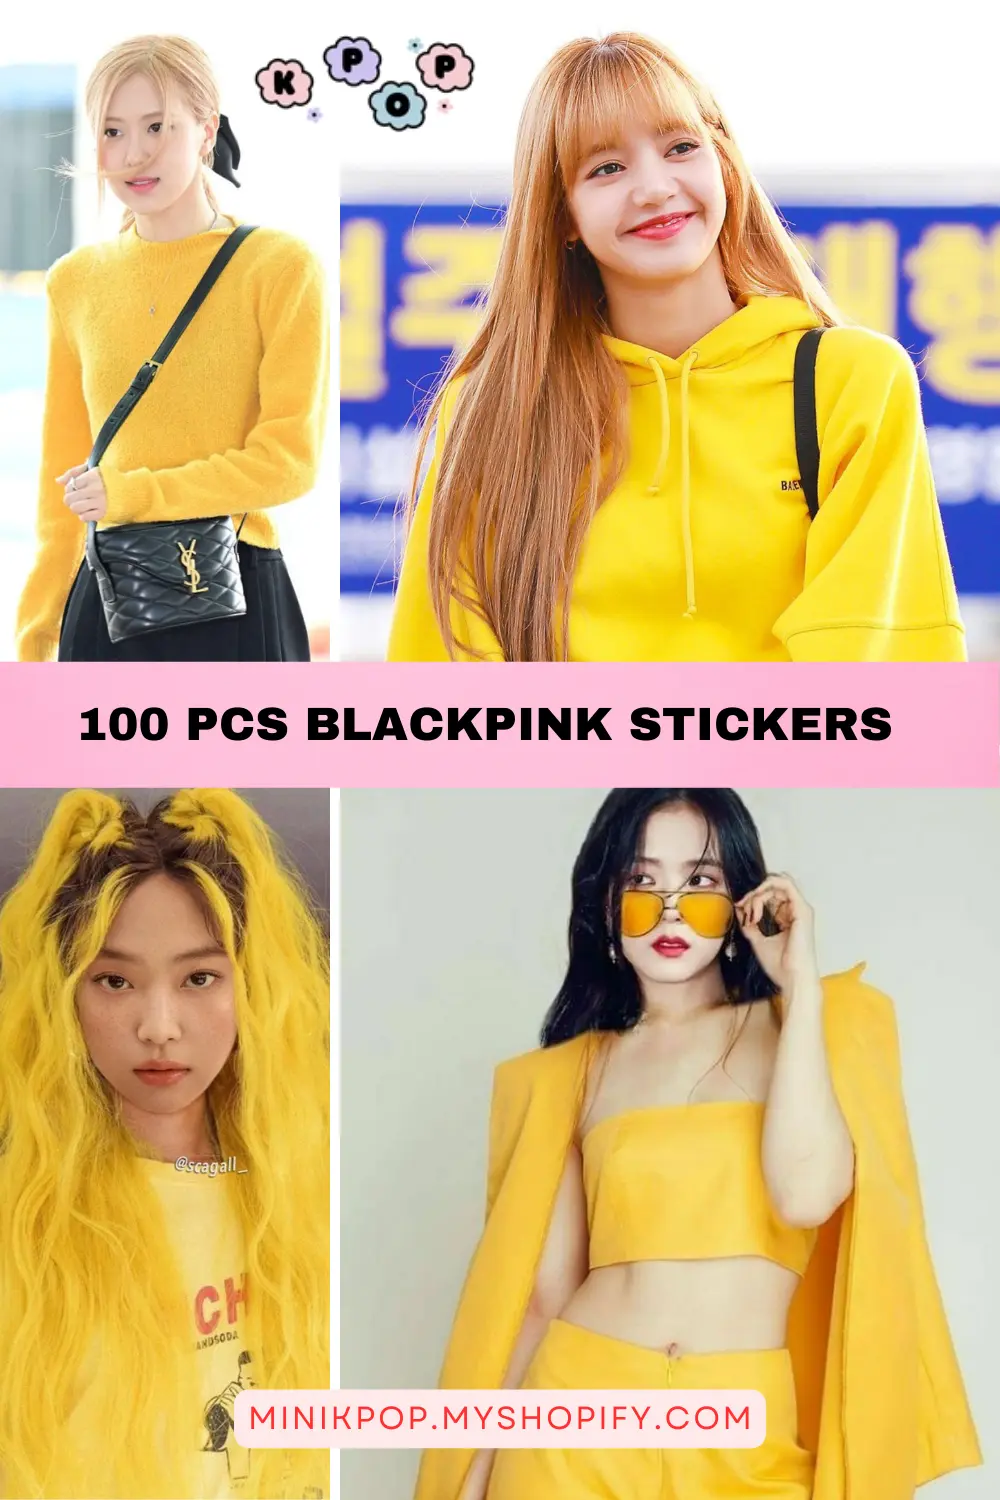 Blackpink Stickers and Photocards 1